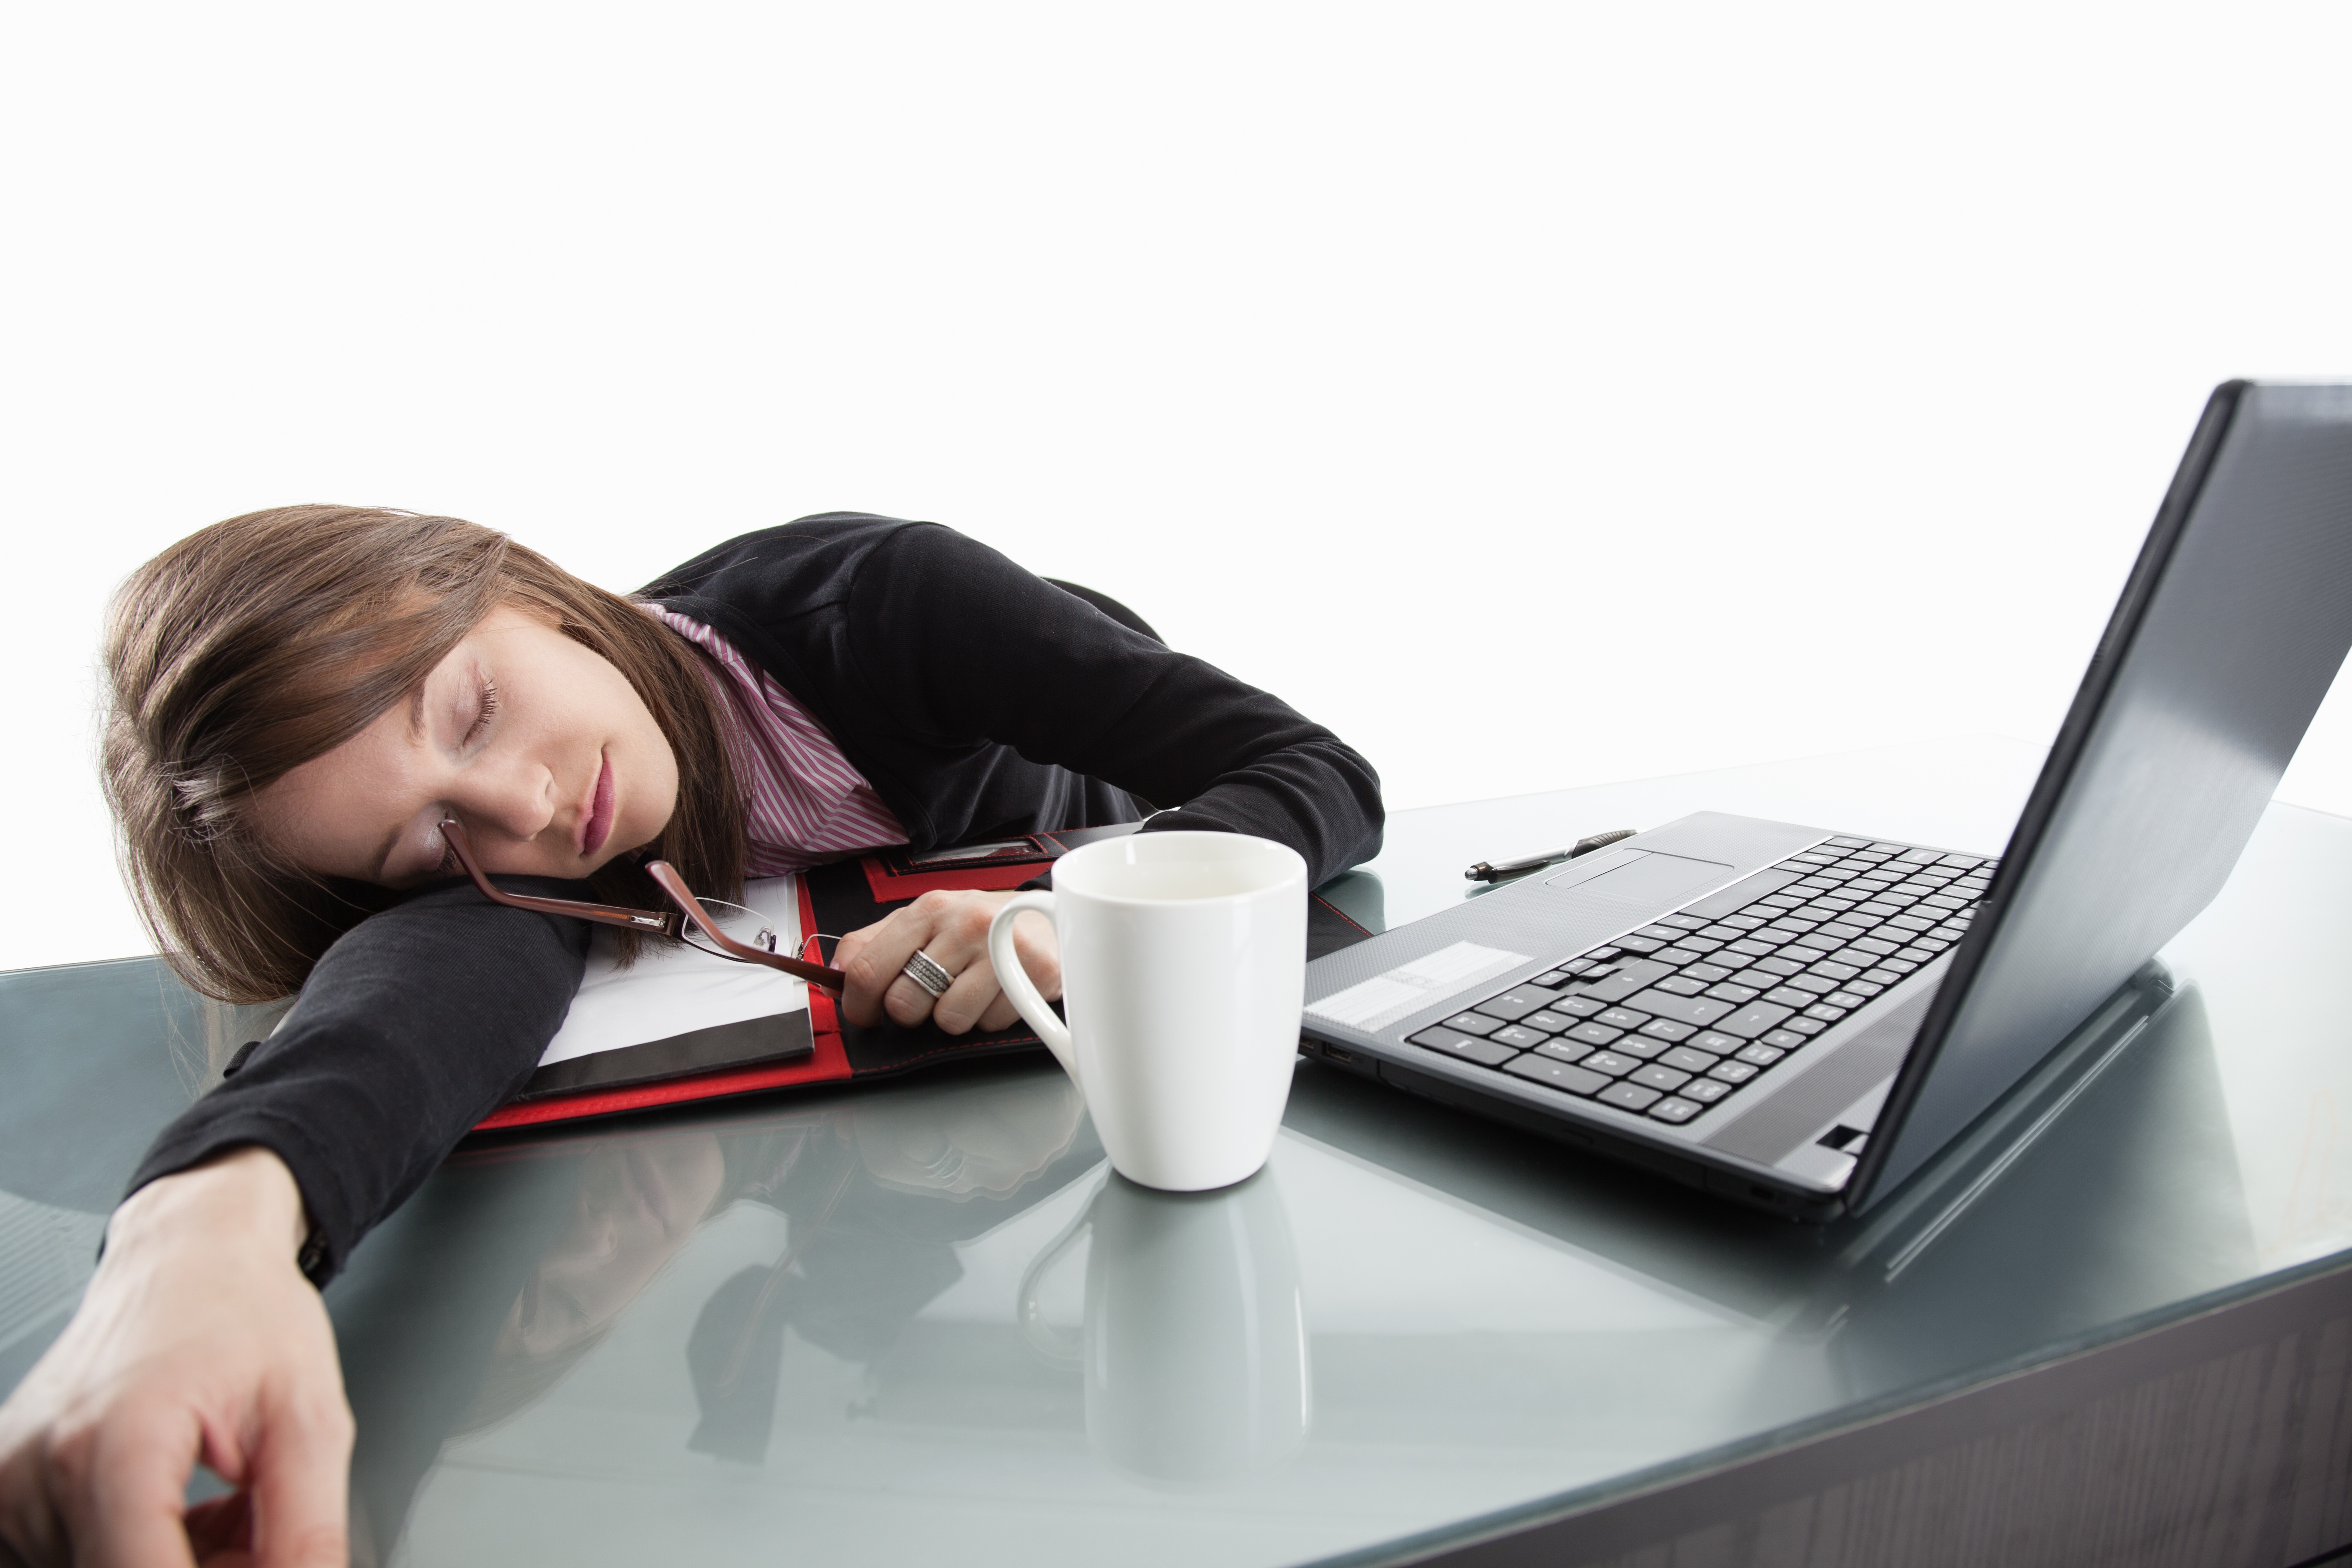 A student passed out on a book in front of a laptopa and a cup of coffee, representing someone who failed at avoiding burnout in business school.